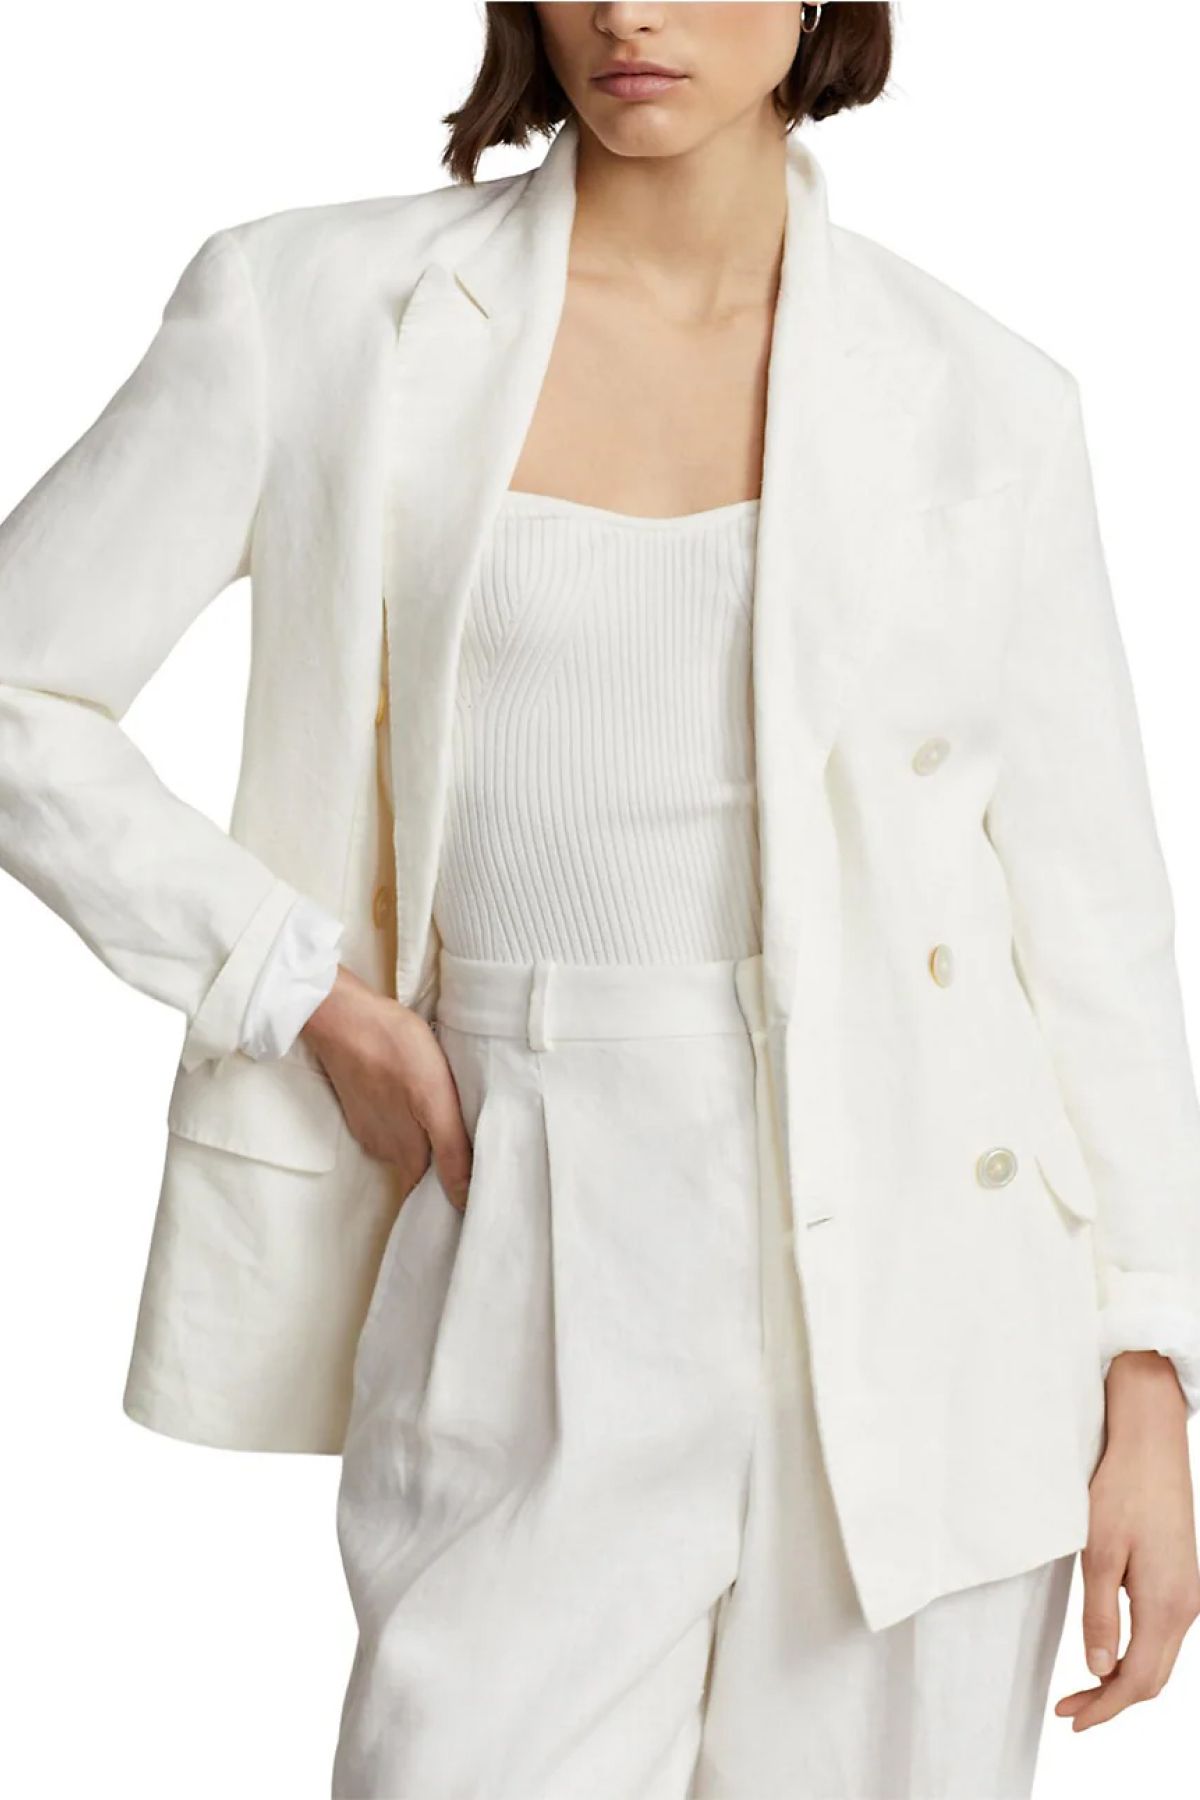 The 11 Best Linen Blazers for Women in 2023 | Marie Claire